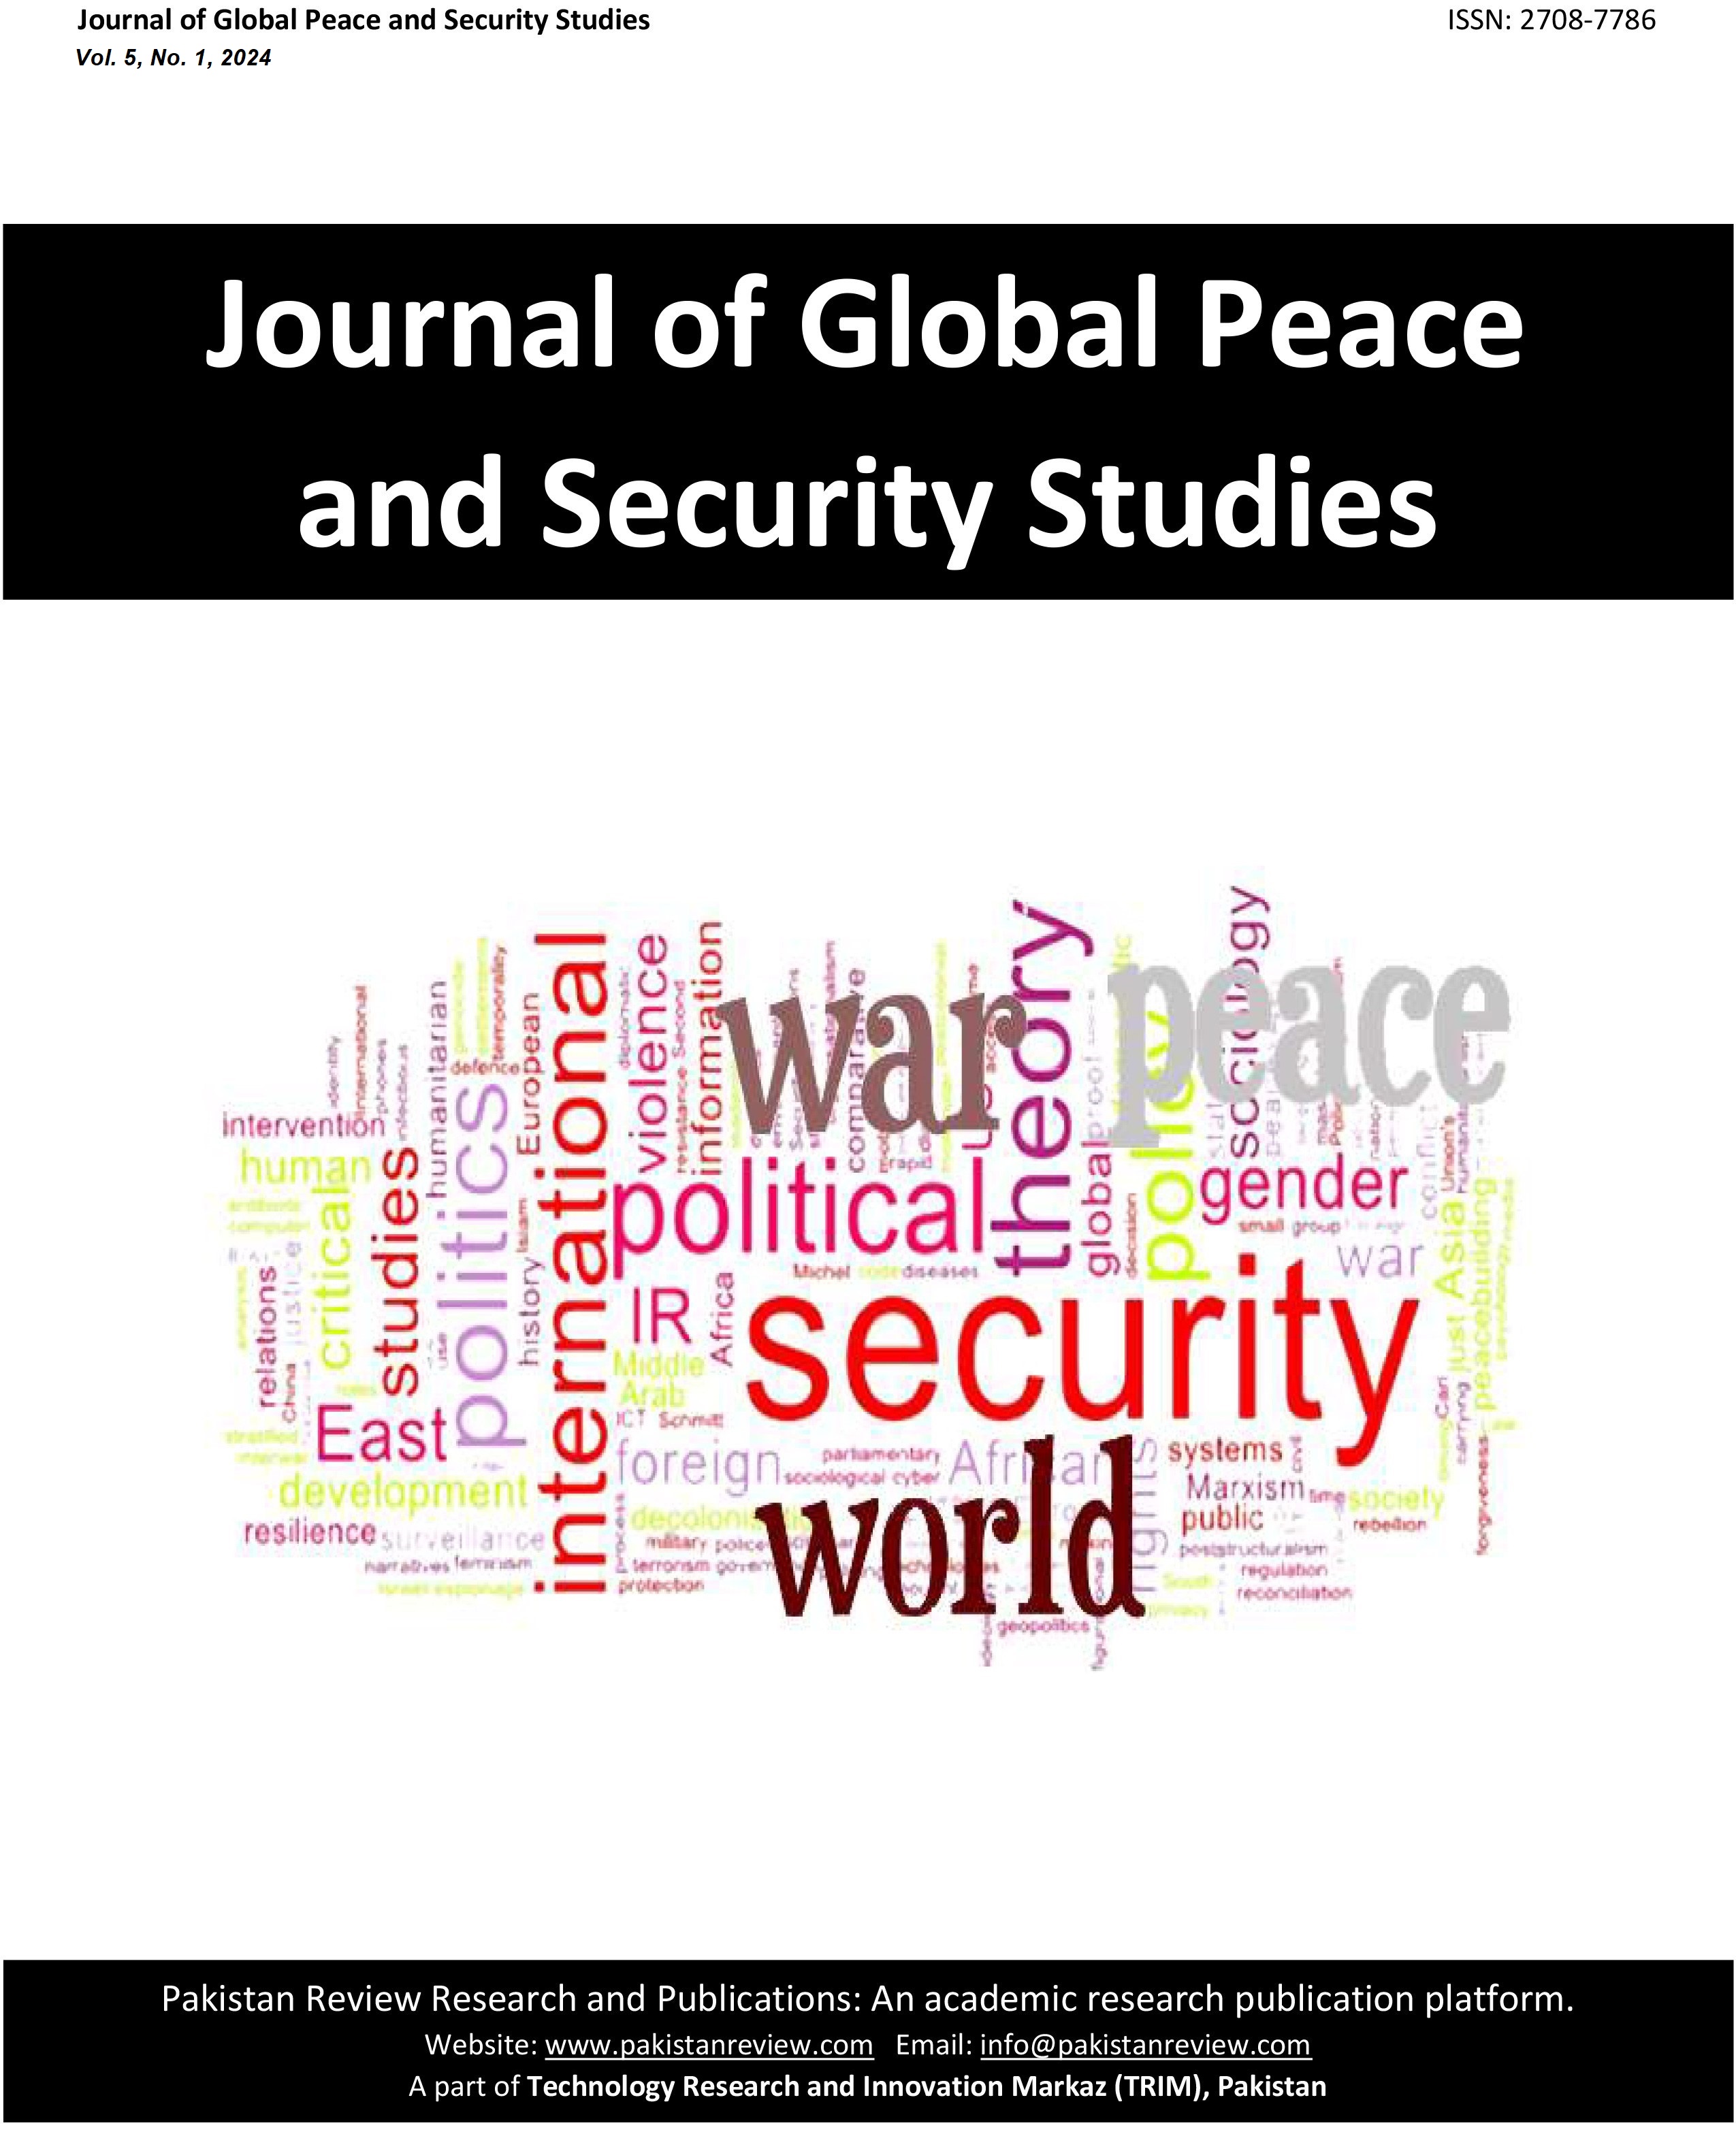 					View Vol. 5 No. 1 (2024): Journal of Global Peace and Security Studies (JGPSS)
				